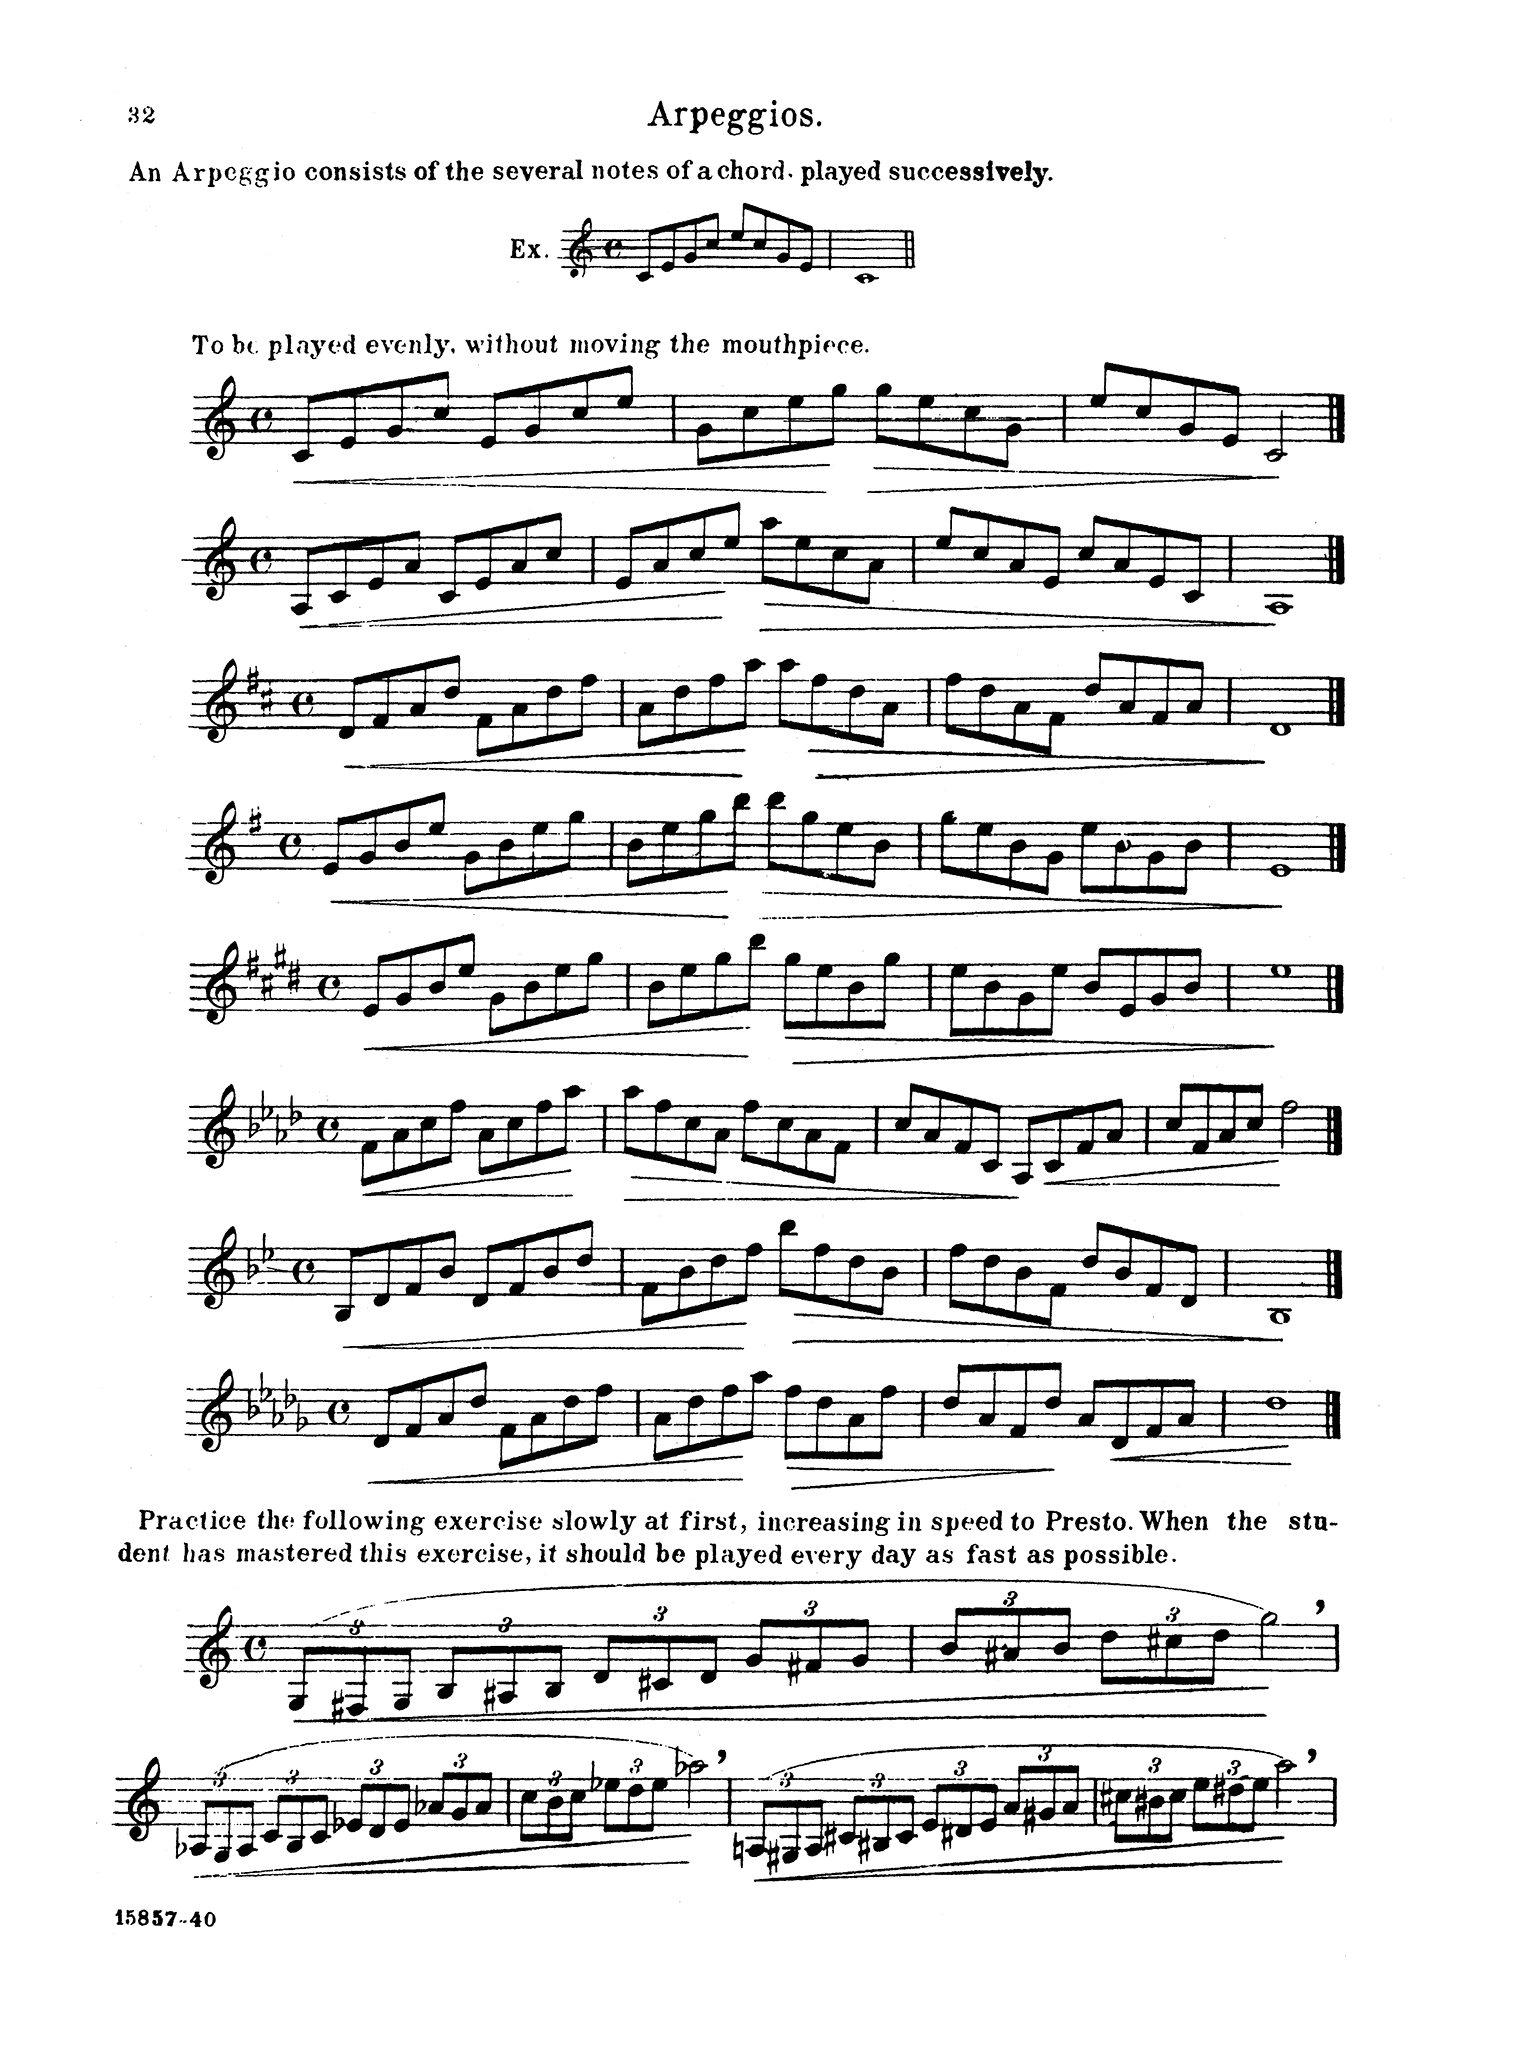 Parès Daily Exercises & Scales for Clarinet page 32